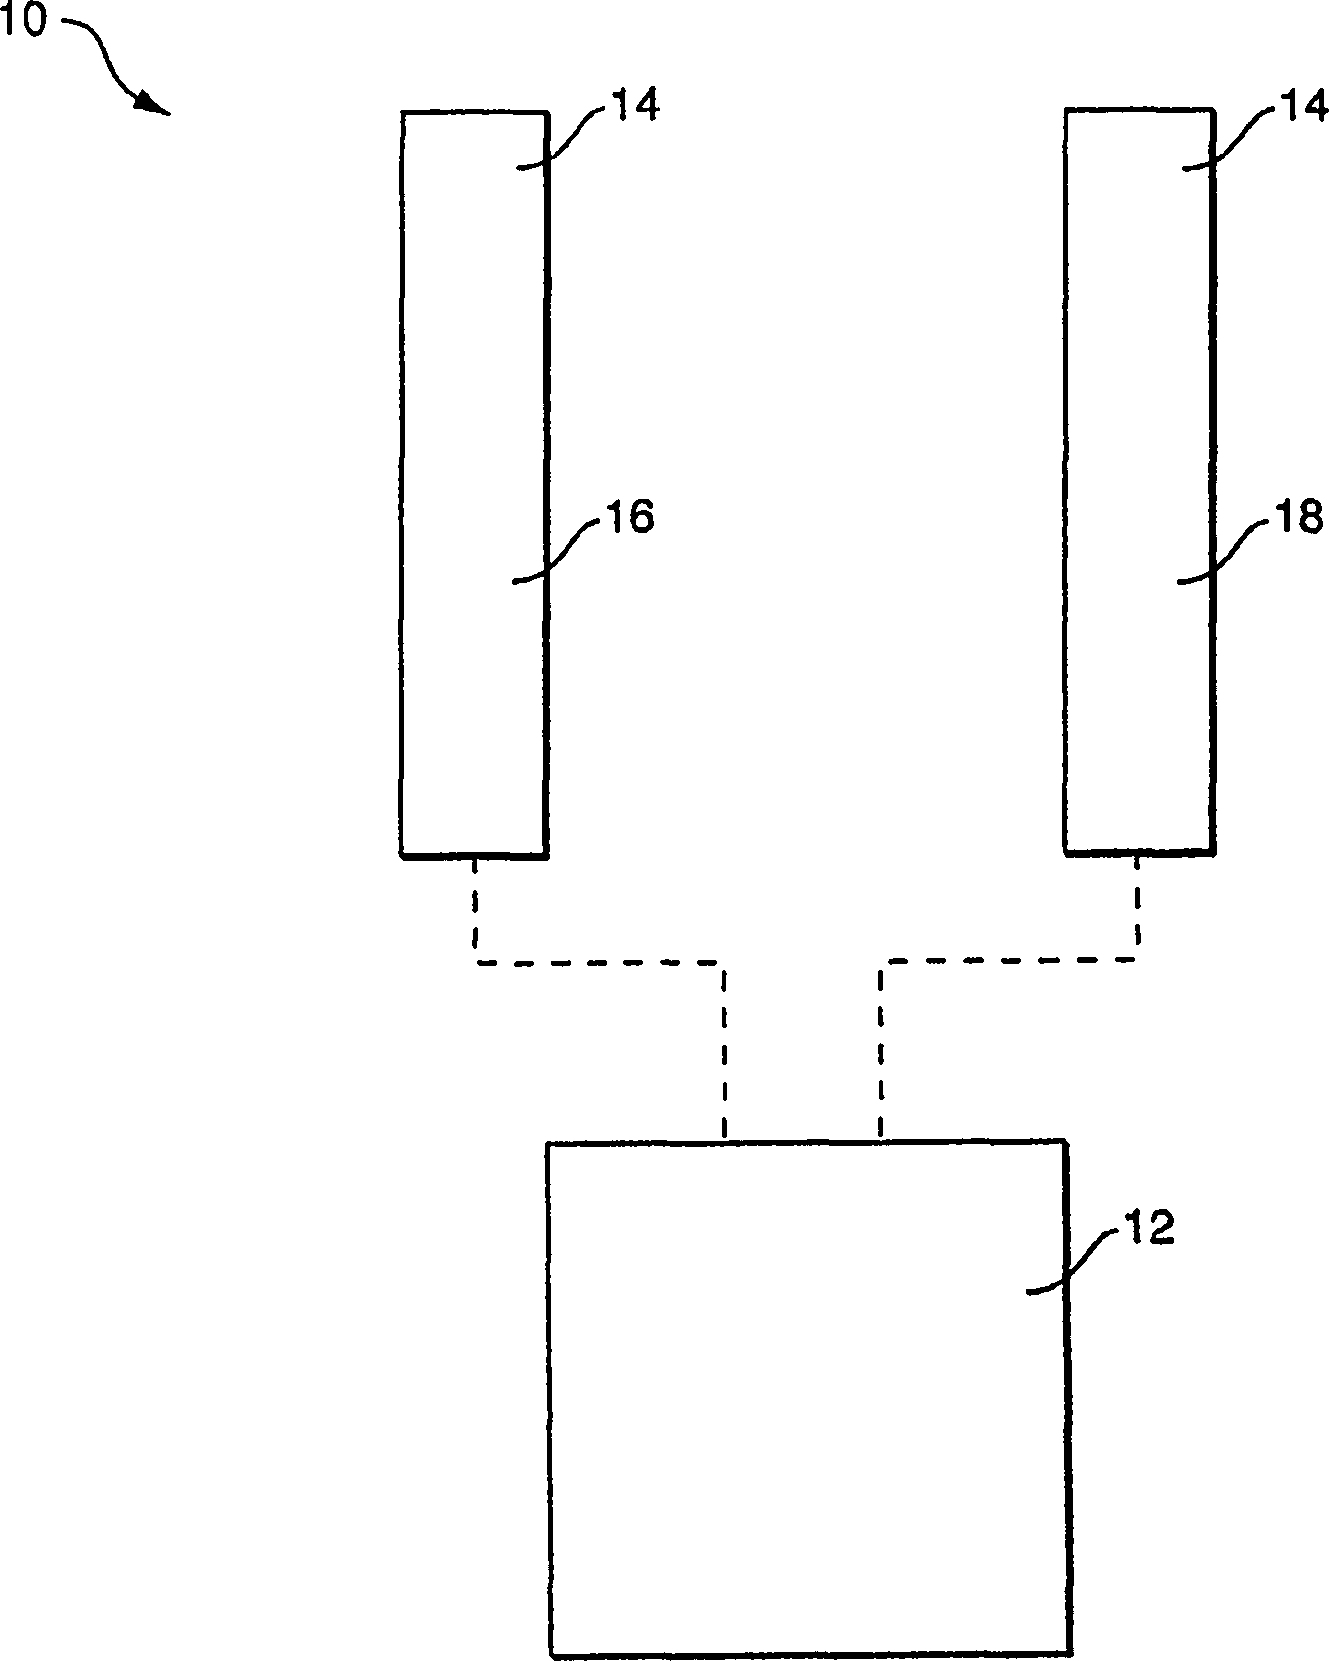 Radiating element for a signal emitting apparatus